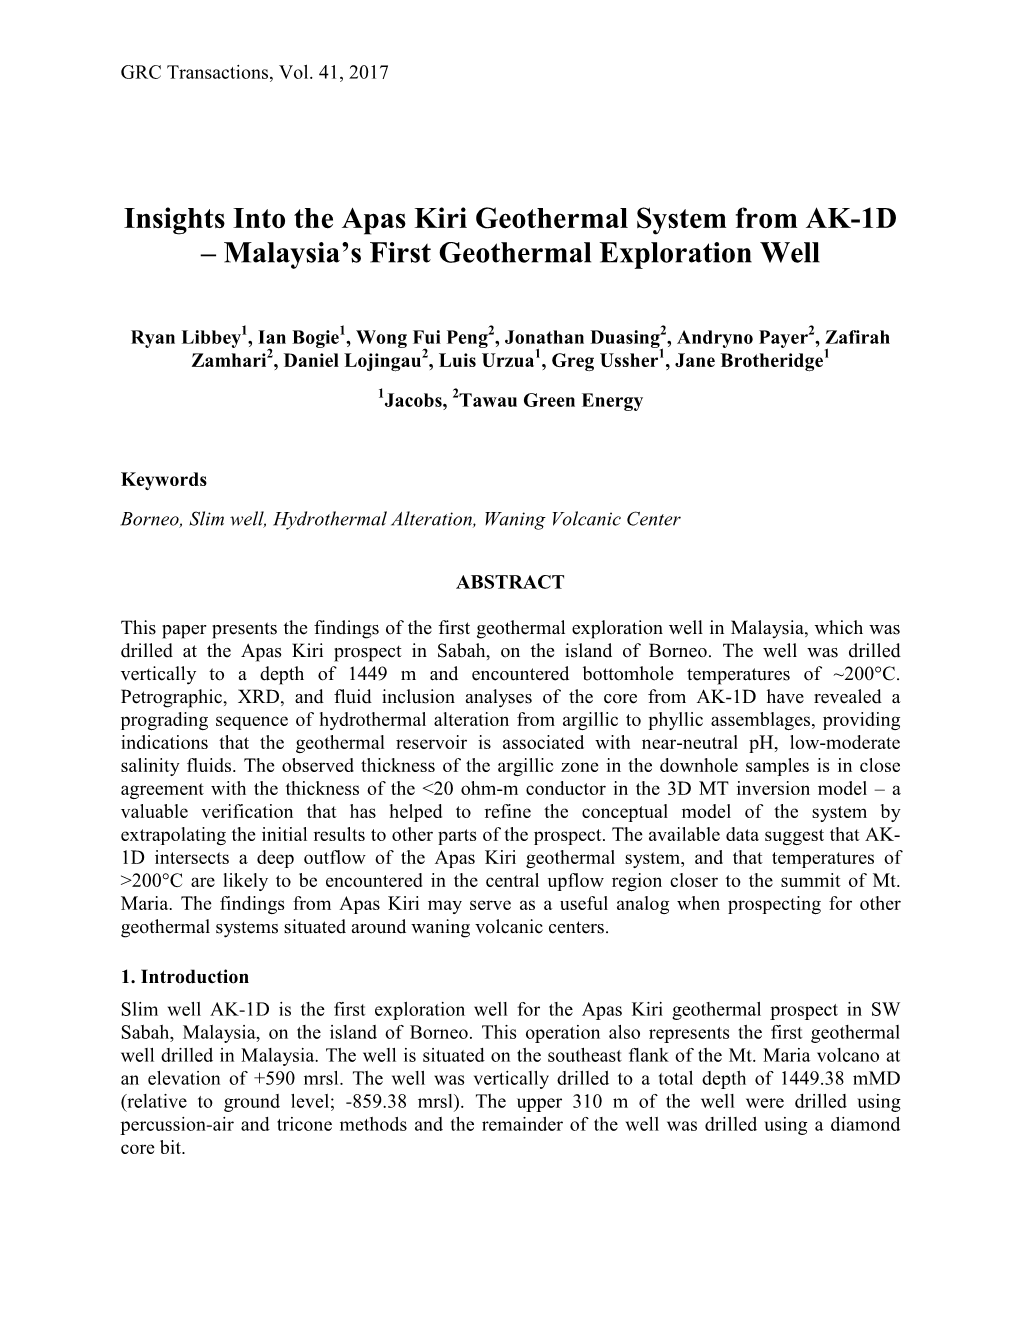 Insights Into the Apas Kiri Geothermal System from AK-1D – Malaysia's